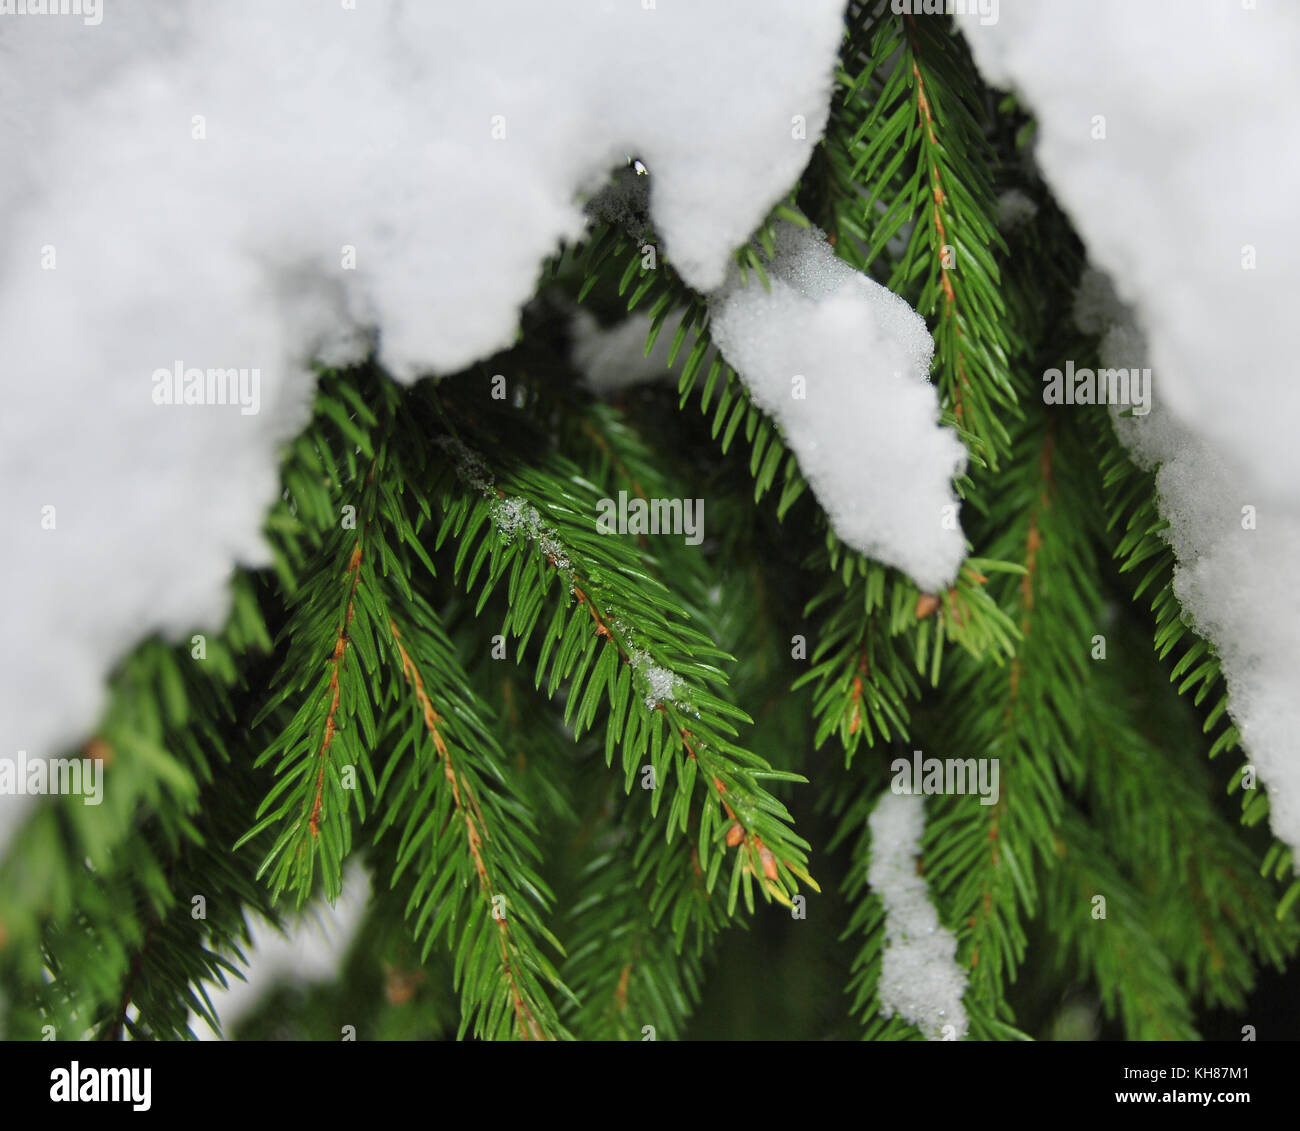 A branch of green spruce covered with white snow Stock Photo